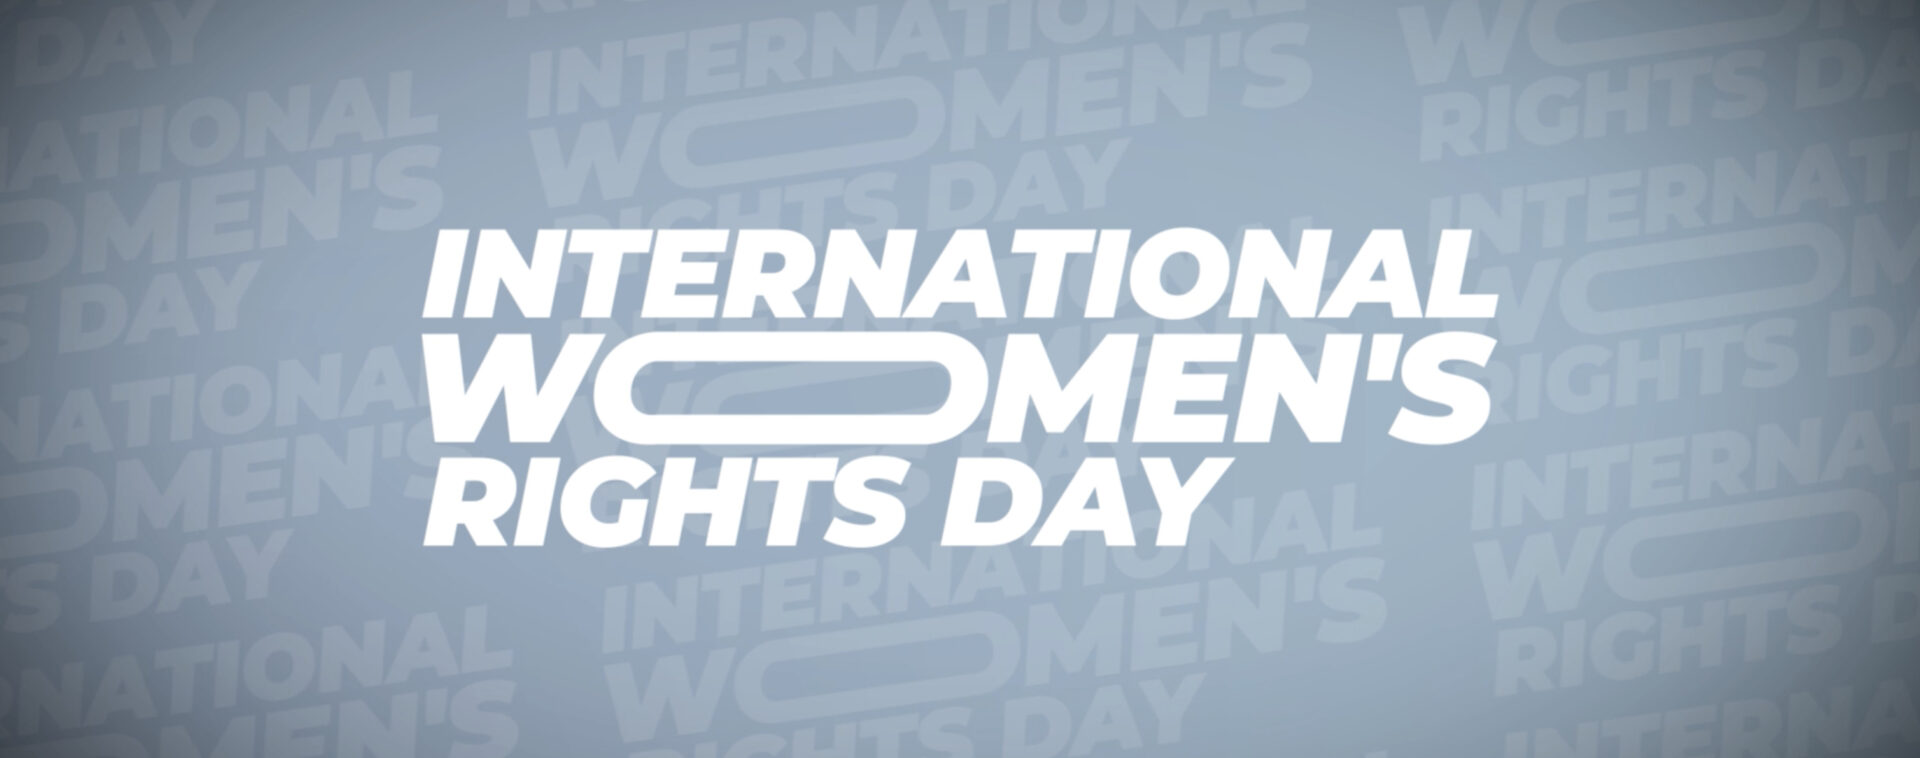 Who wants the program for the International Women’s day?